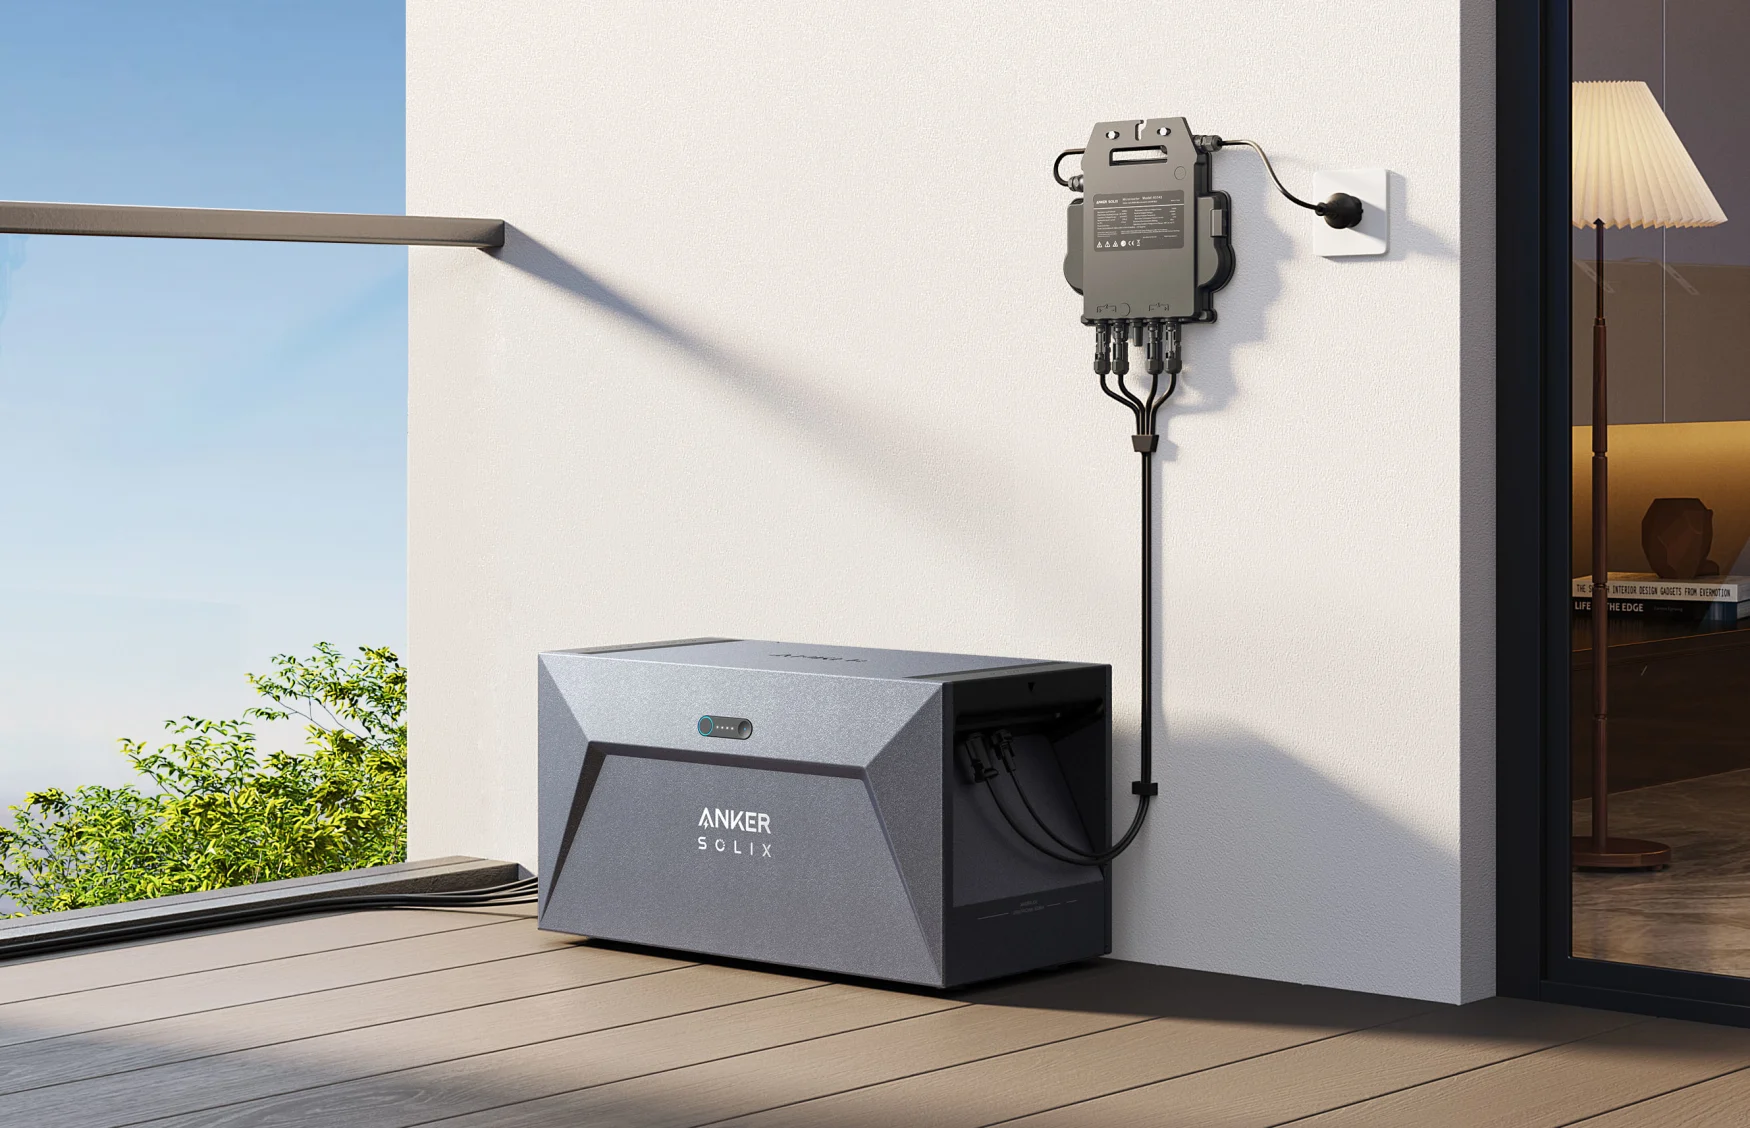 Anker's new Solix home energy storage includes a modular solar battery system